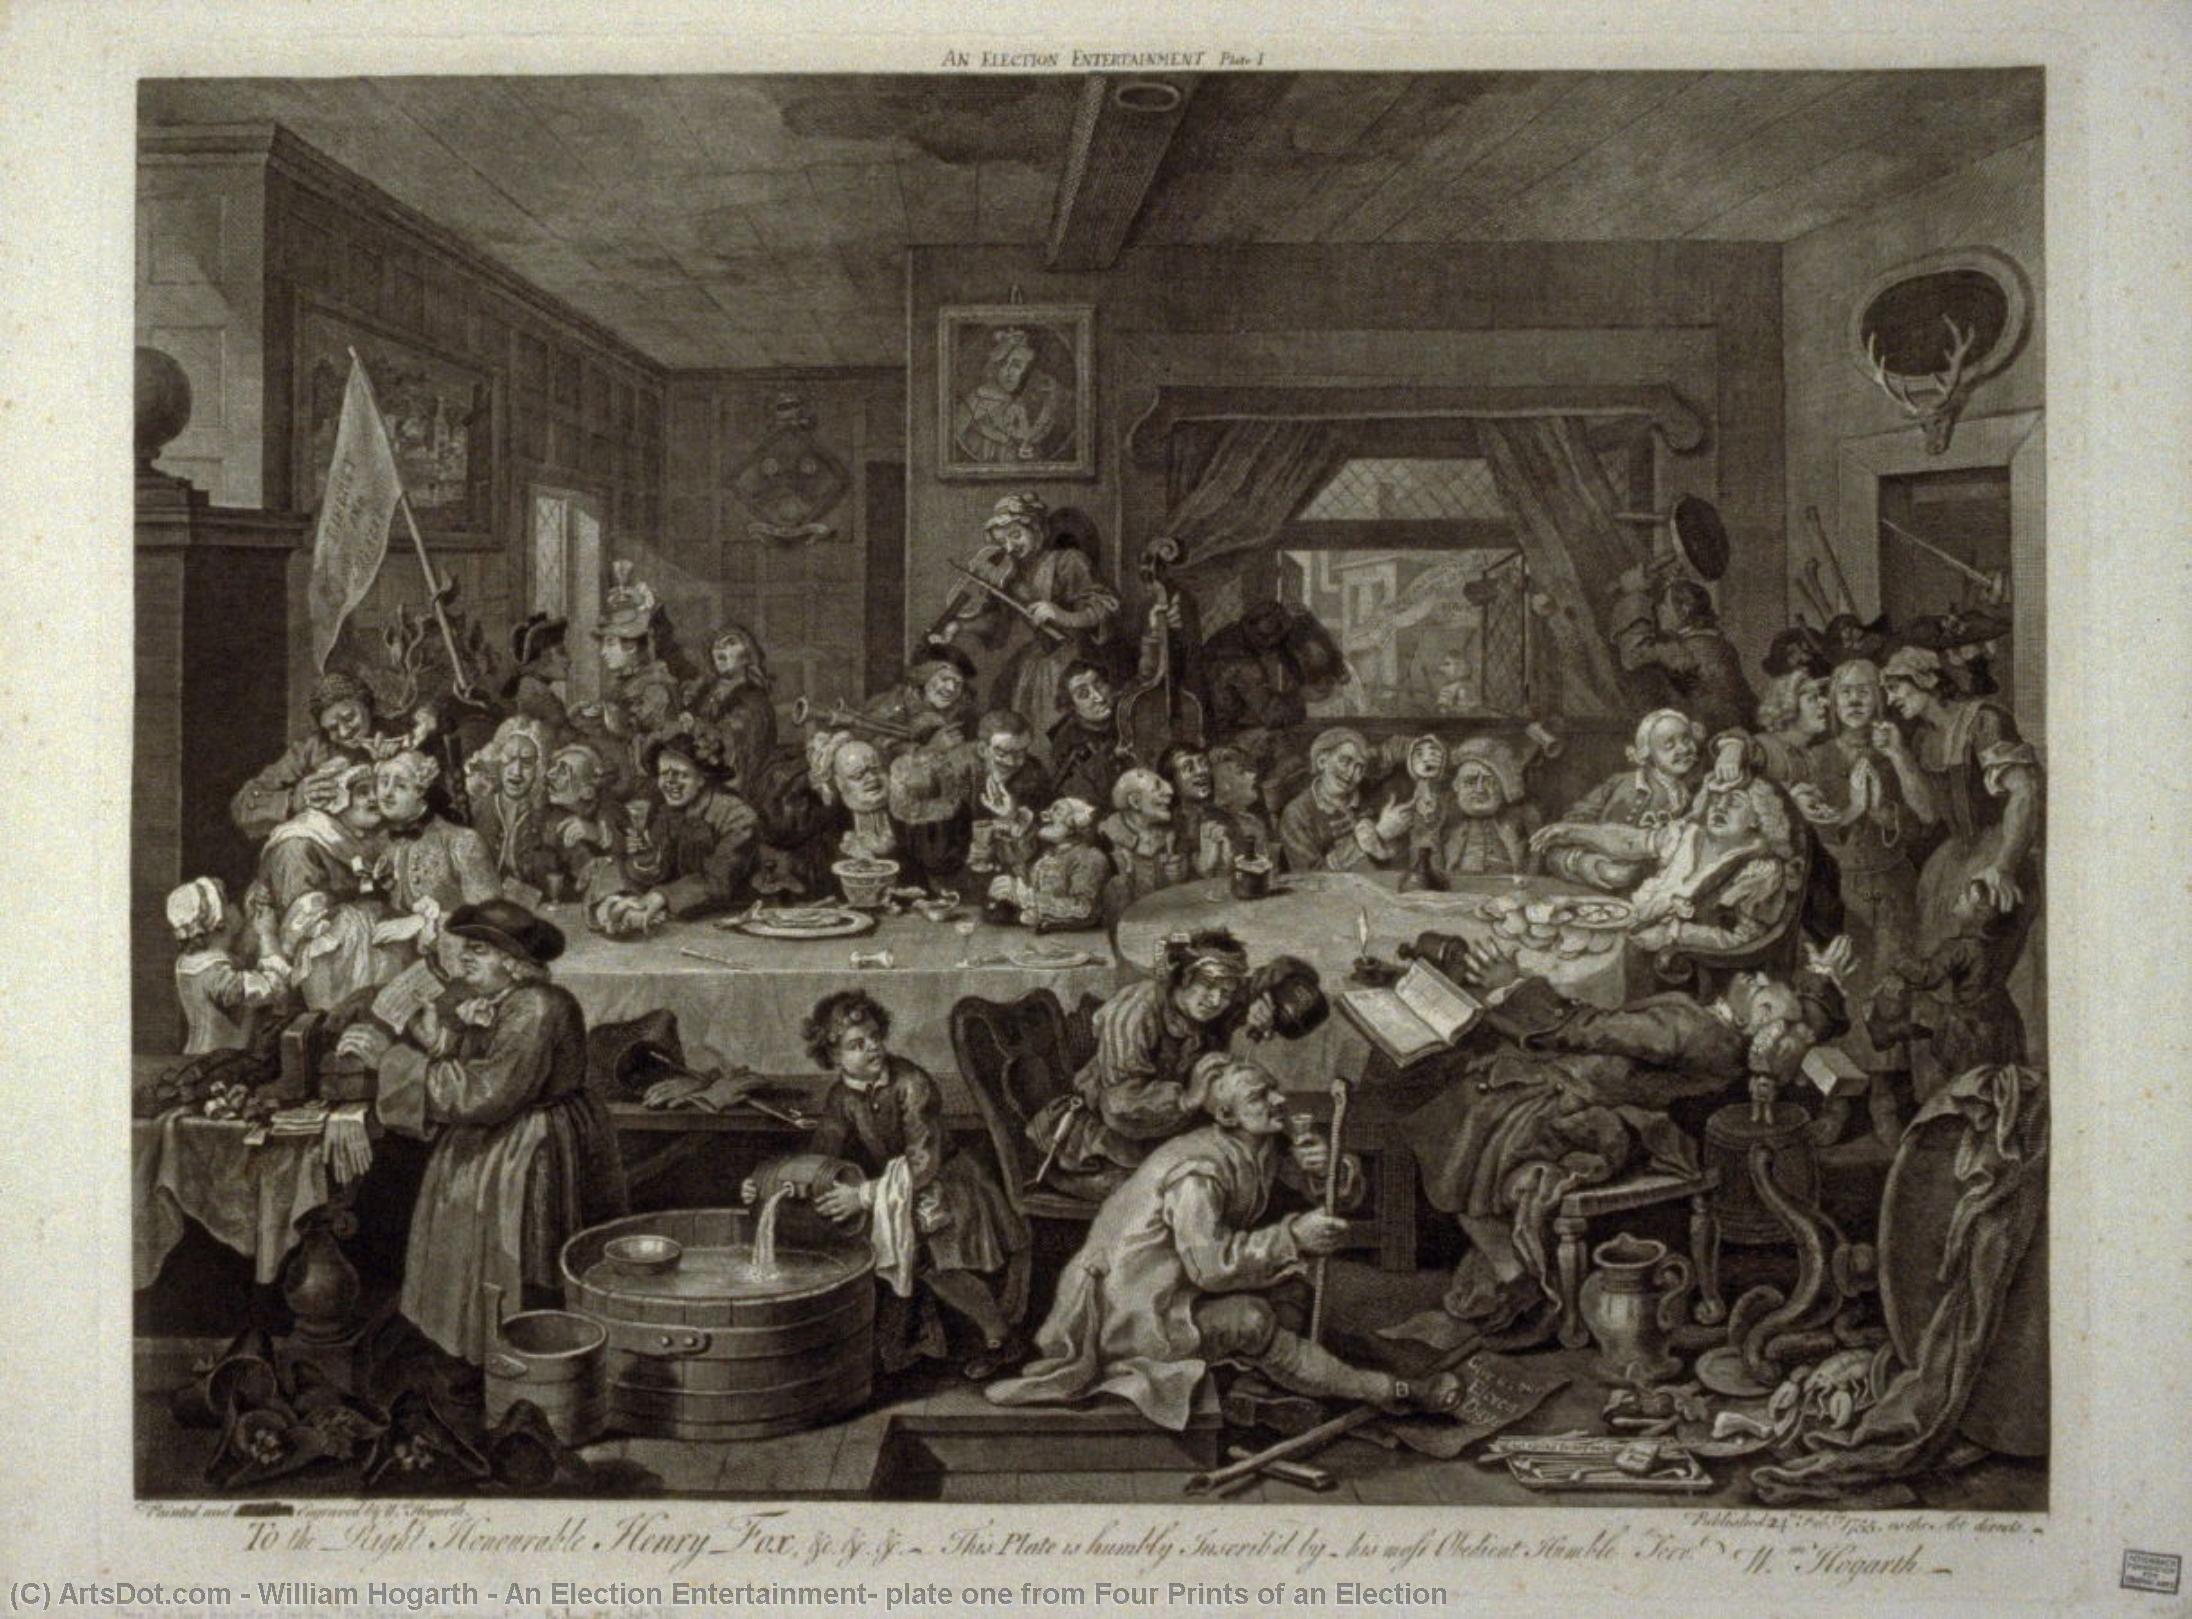 WikiOO.org - 백과 사전 - 회화, 삽화 William Hogarth - An Election Entertainment, plate one from Four Prints of an Election